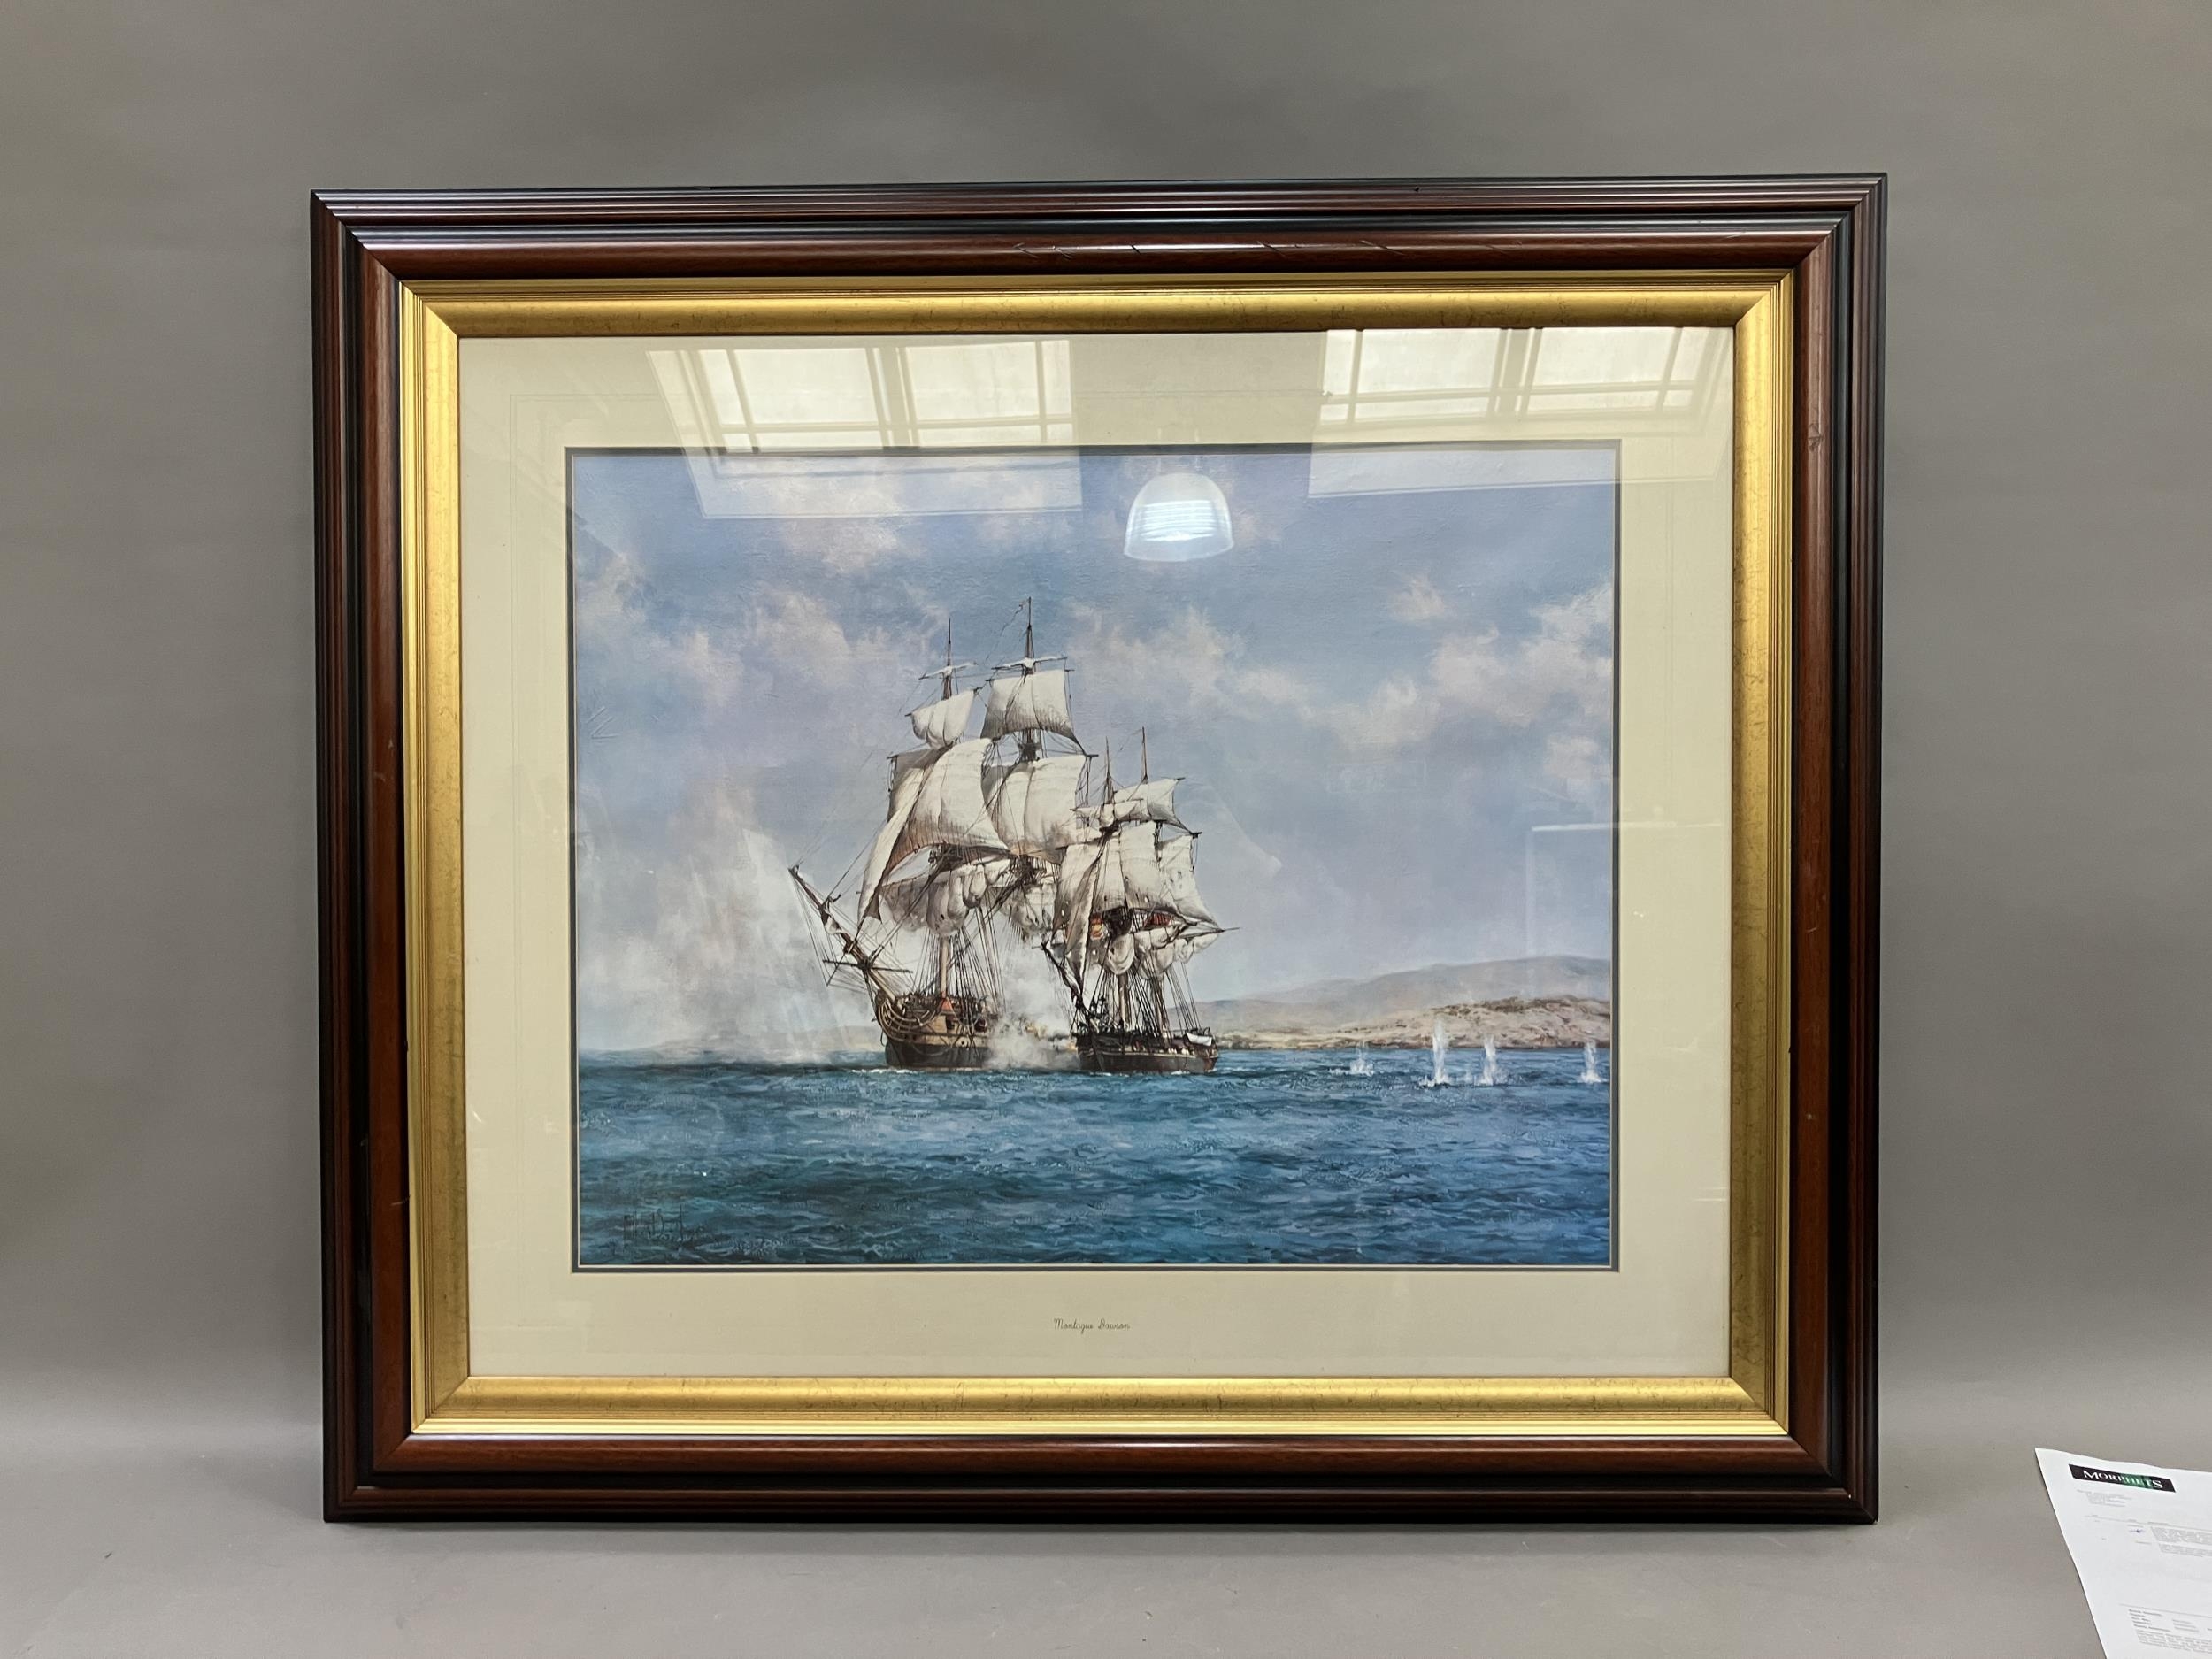 After Montagu Dawson, colour print, Naval Engagement Off The Coast, overall with frame 97cm x 103cm